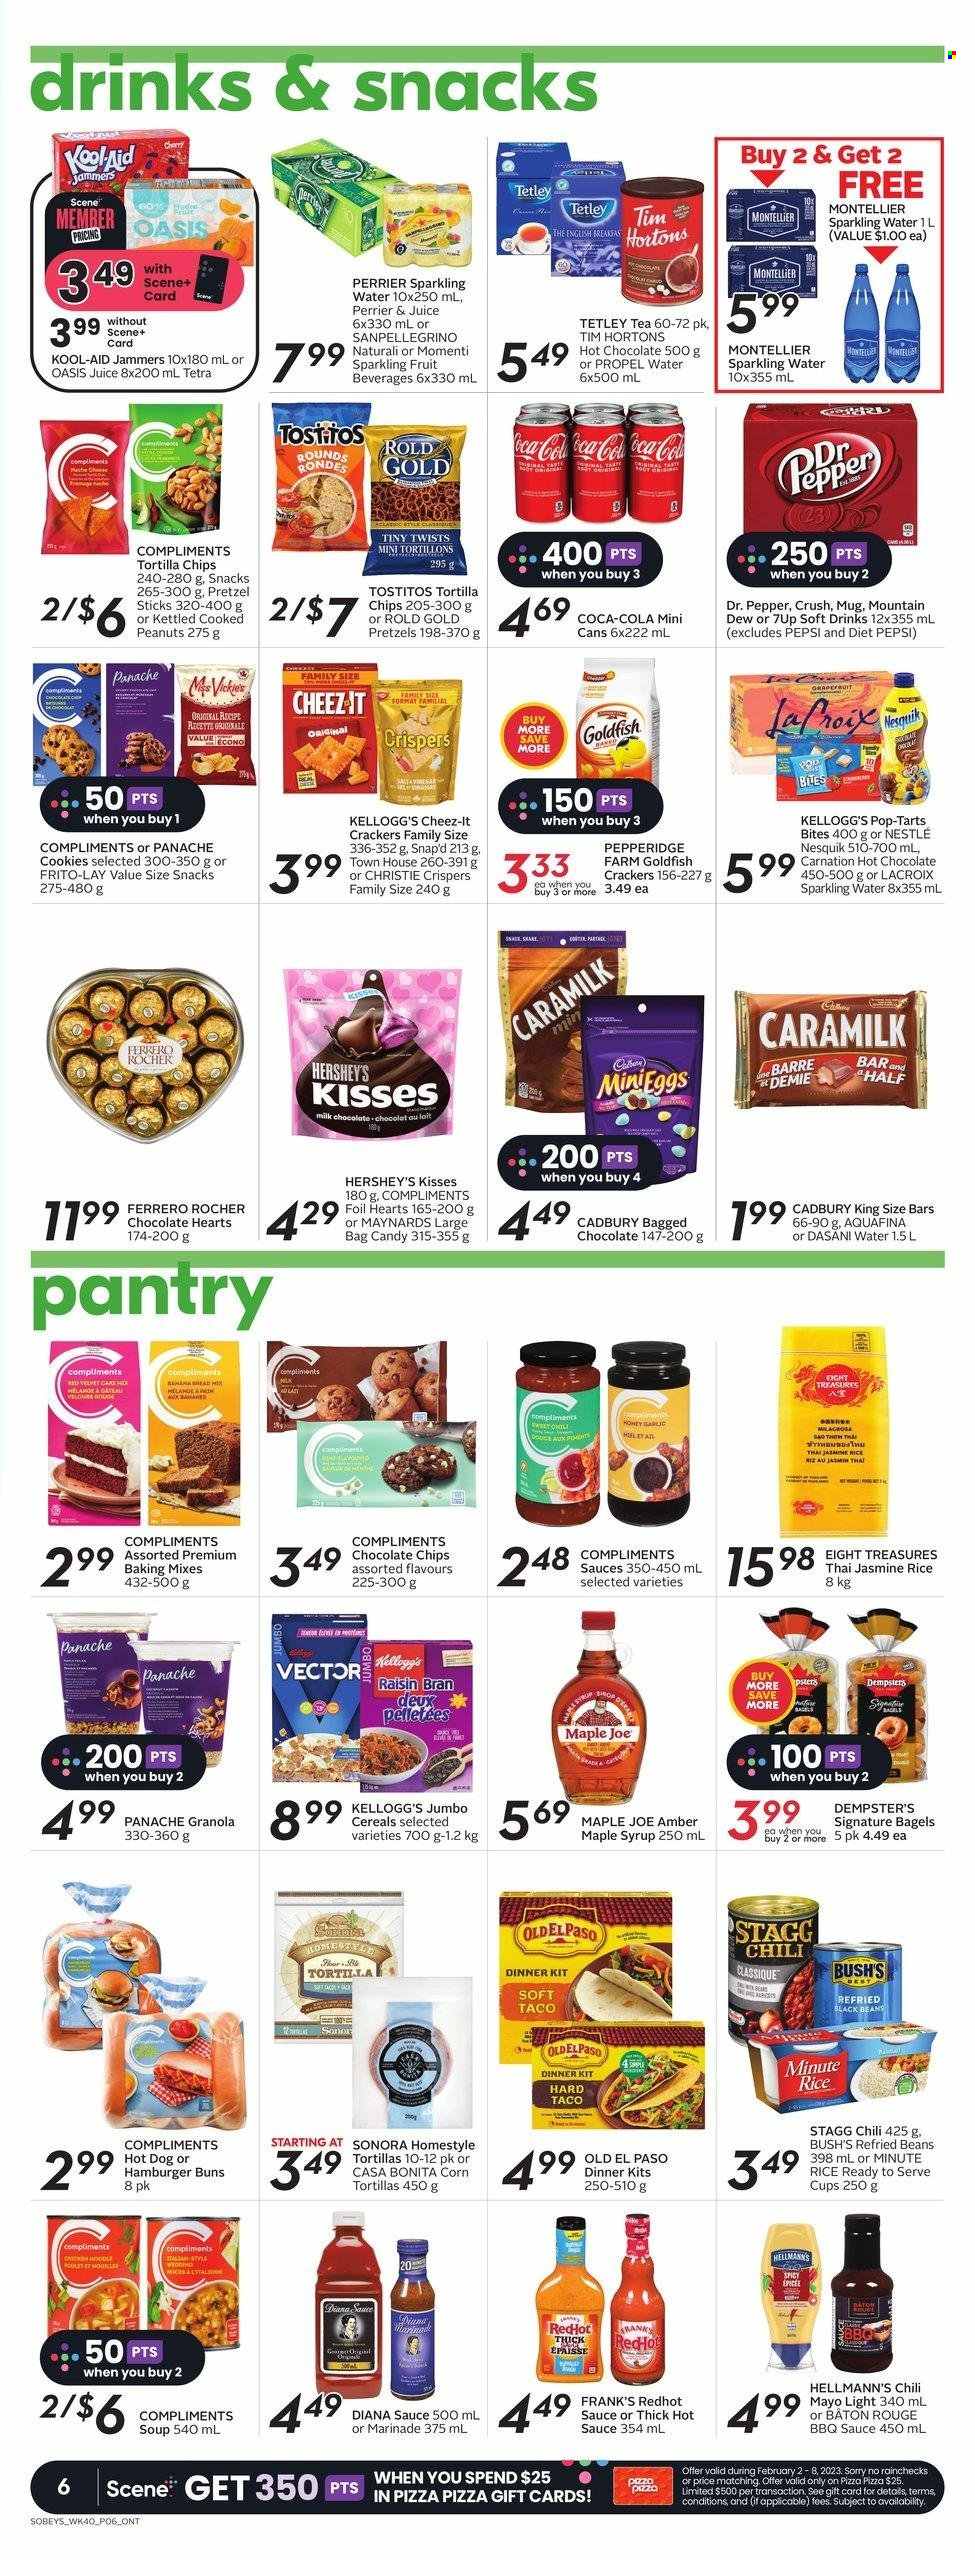 thumbnail - Sobeys Flyer - February 02, 2023 - February 08, 2023 - Sales products - corn tortillas, pretzels, buns, Old El Paso, burger buns, beans, cherries, hot dog, soup, dinner kit, mayonnaise, Hellmann’s, Hershey's, cookies, milk chocolate, crackers, Kellogg's, Cadbury, Pop-Tarts, tortilla chips, Goldfish, Frito-Lay, Cheez-It, Tostitos, baking mix, refried beans, cereals, Raisin Bran, rice, jasmine rice, BBQ sauce, hot sauce, marinade, maple syrup, honey, syrup, peanuts, Coca-Cola, Mountain Dew, Pepsi, juice, Dr. Pepper, Diet Pepsi, soft drink, 7UP, Perrier, Aquafina, sparkling water, hot chocolate, tea, granola, Nestlé, Ferrero Rocher, Nesquik. Page 7.